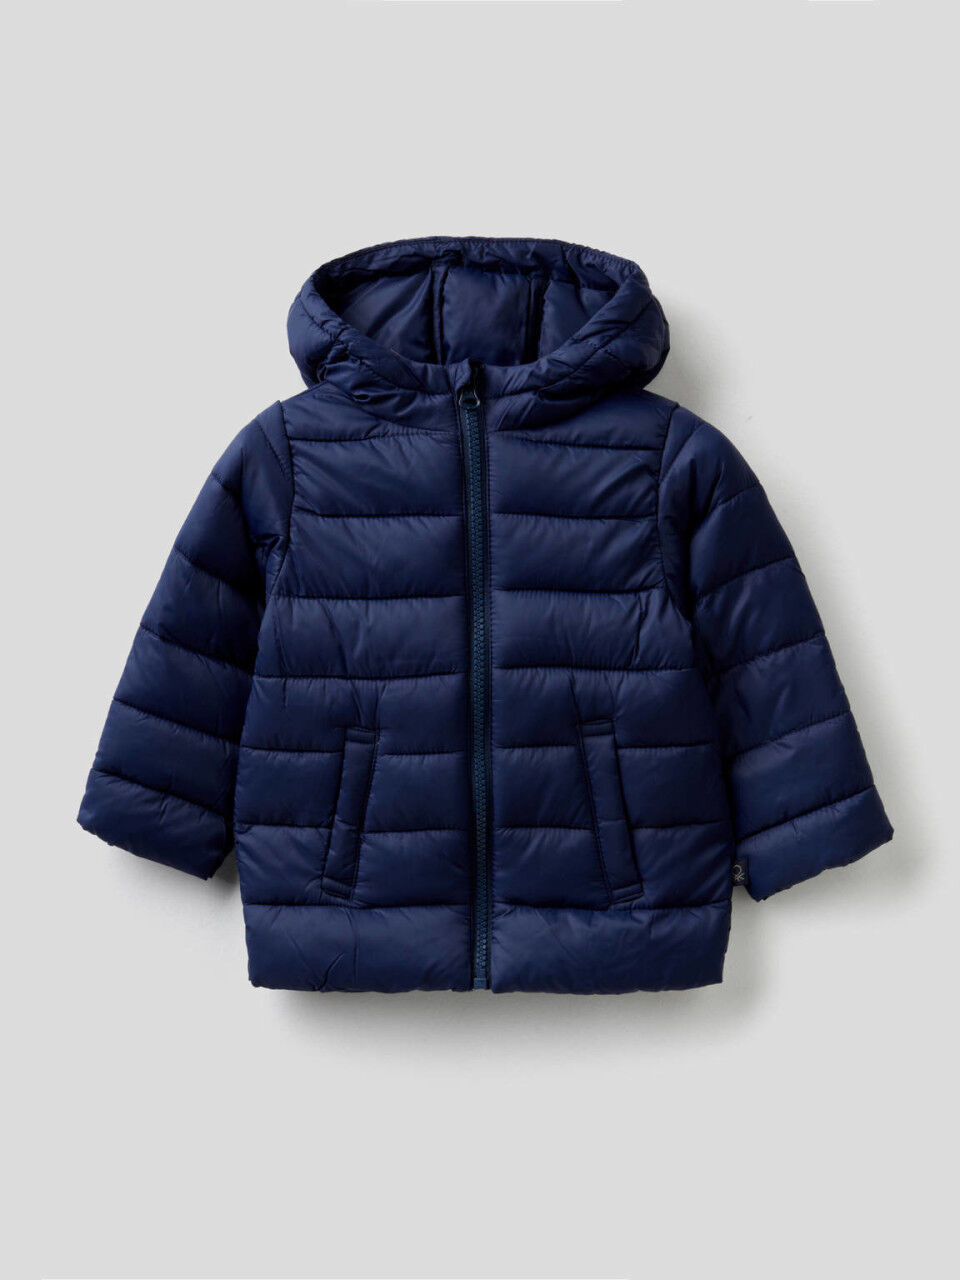 New Born Padded and Puffer Jackets New Collection 2021 | Benetton